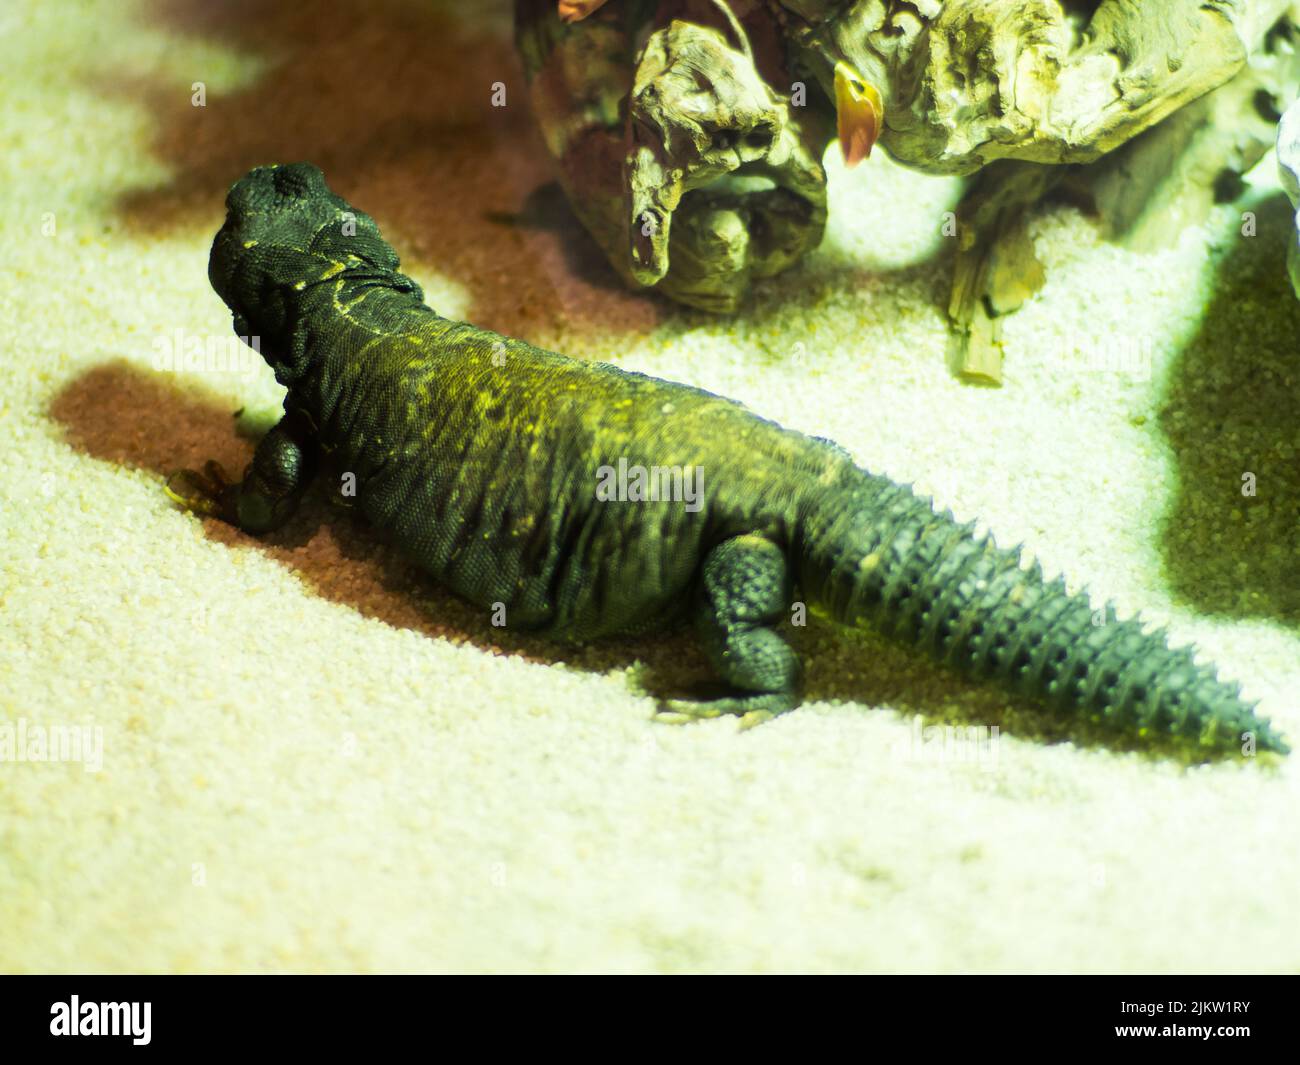 A closeup of a cute green Bell's dabb lizard looking to the side in an aquarium Stock Photo